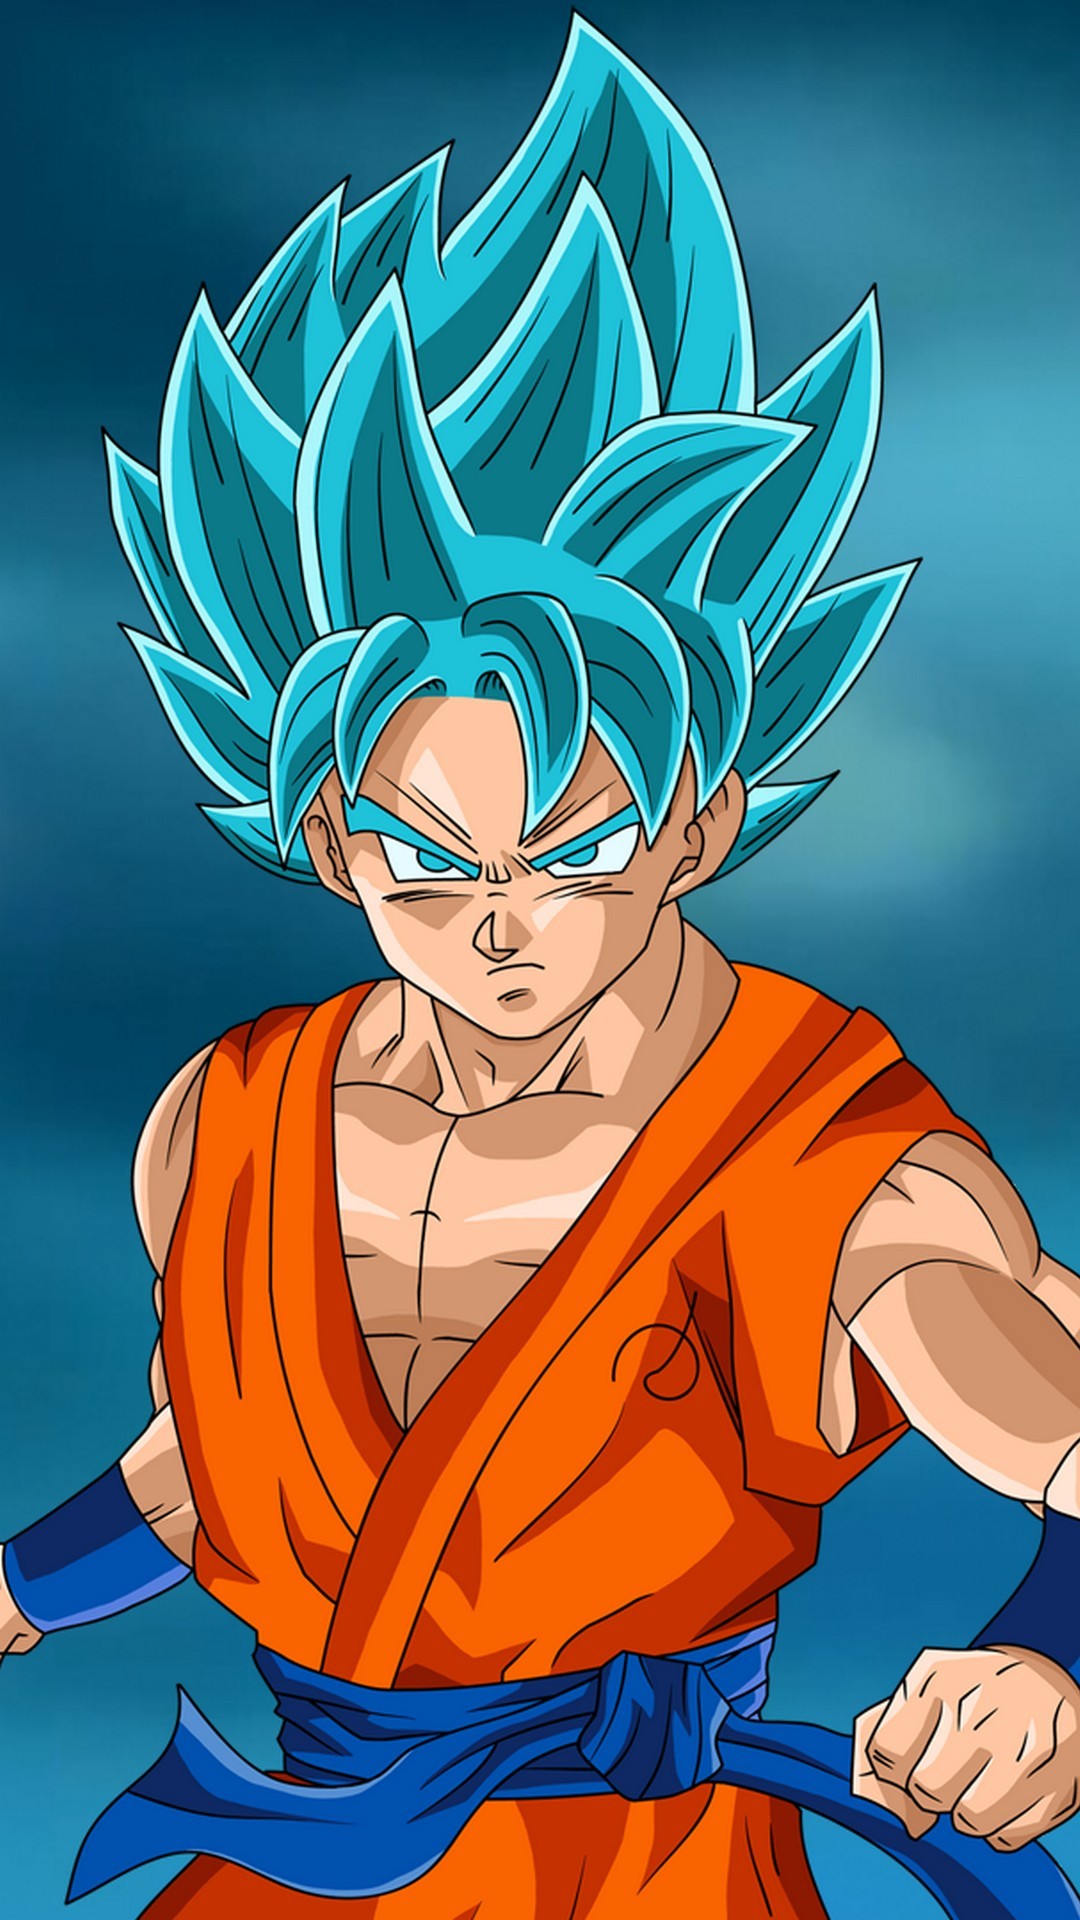 Wallpaper iPhone Goku SSJ with image resolution 1080x1920 pixel. You can make this wallpaper for your iPhone 5, 6, 7, 8, X backgrounds, Mobile Screensaver, or iPad Lock Screen